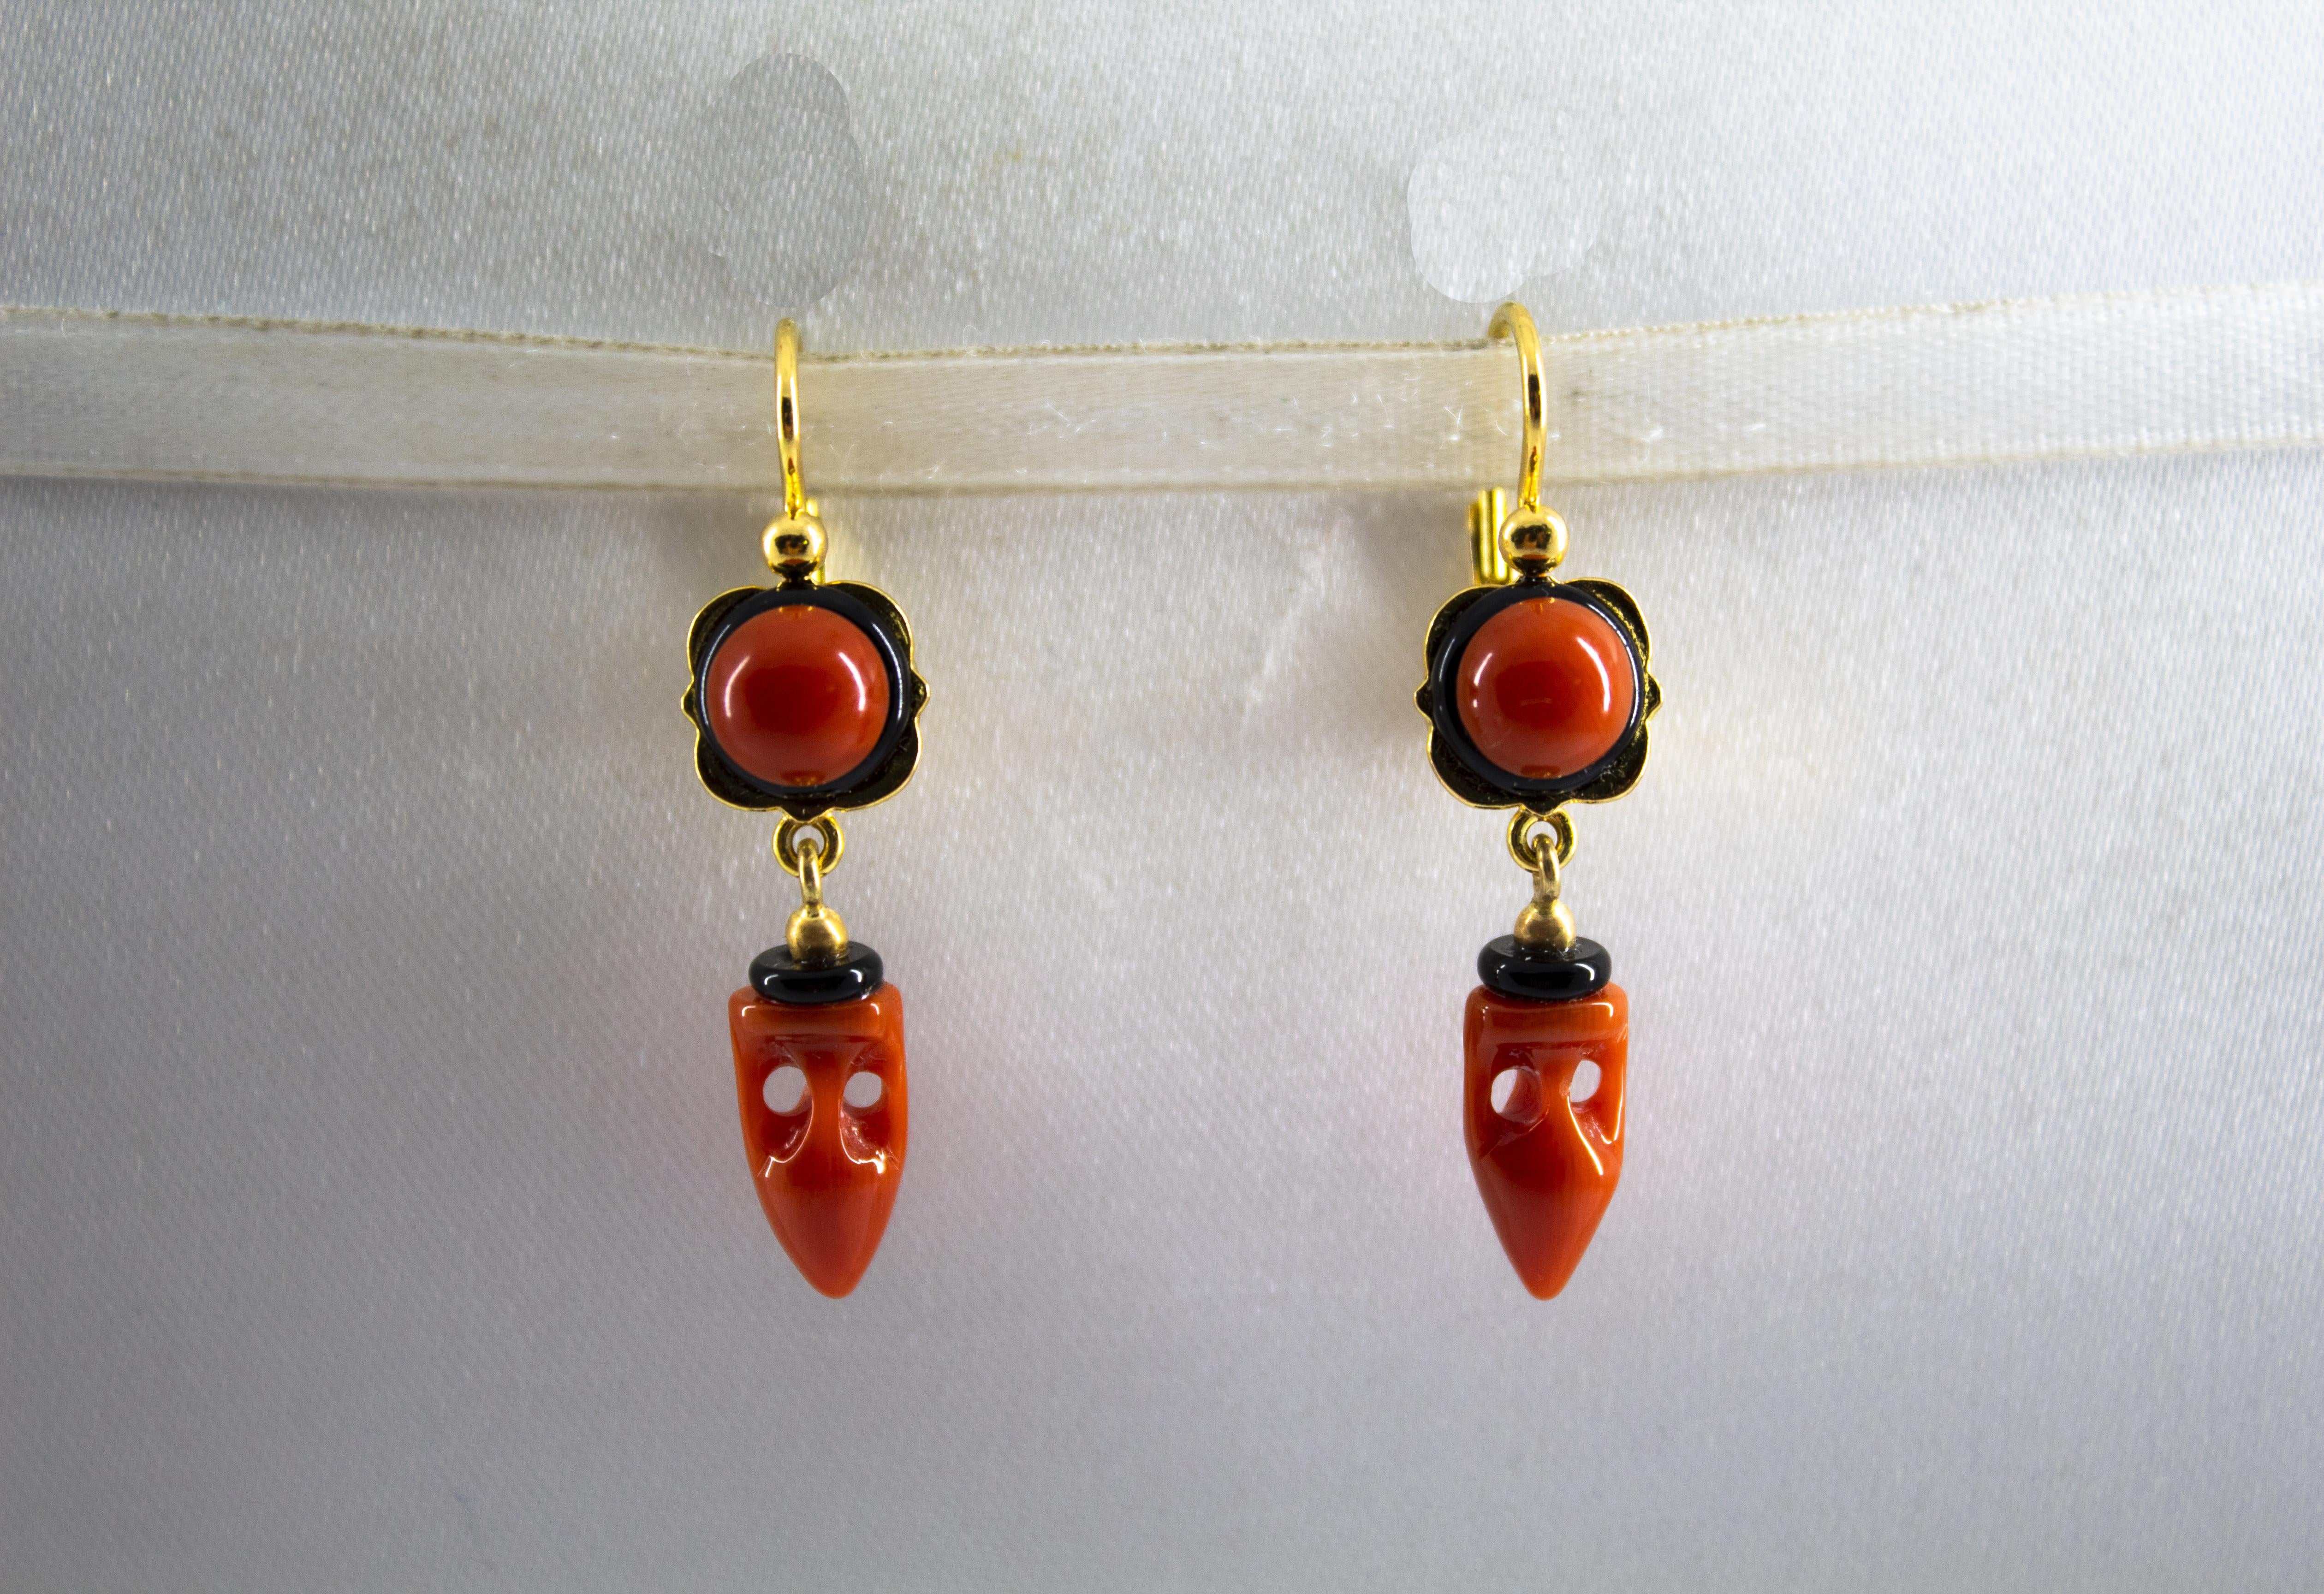 These Earrings are made of 14K Yellow Gold.
These Earrings have Red Mediterranean (Sardinia, Italy) Coral.
These Earrings have also Onyx.
We're a workshop so every piece is handmade, customizable and resizable.